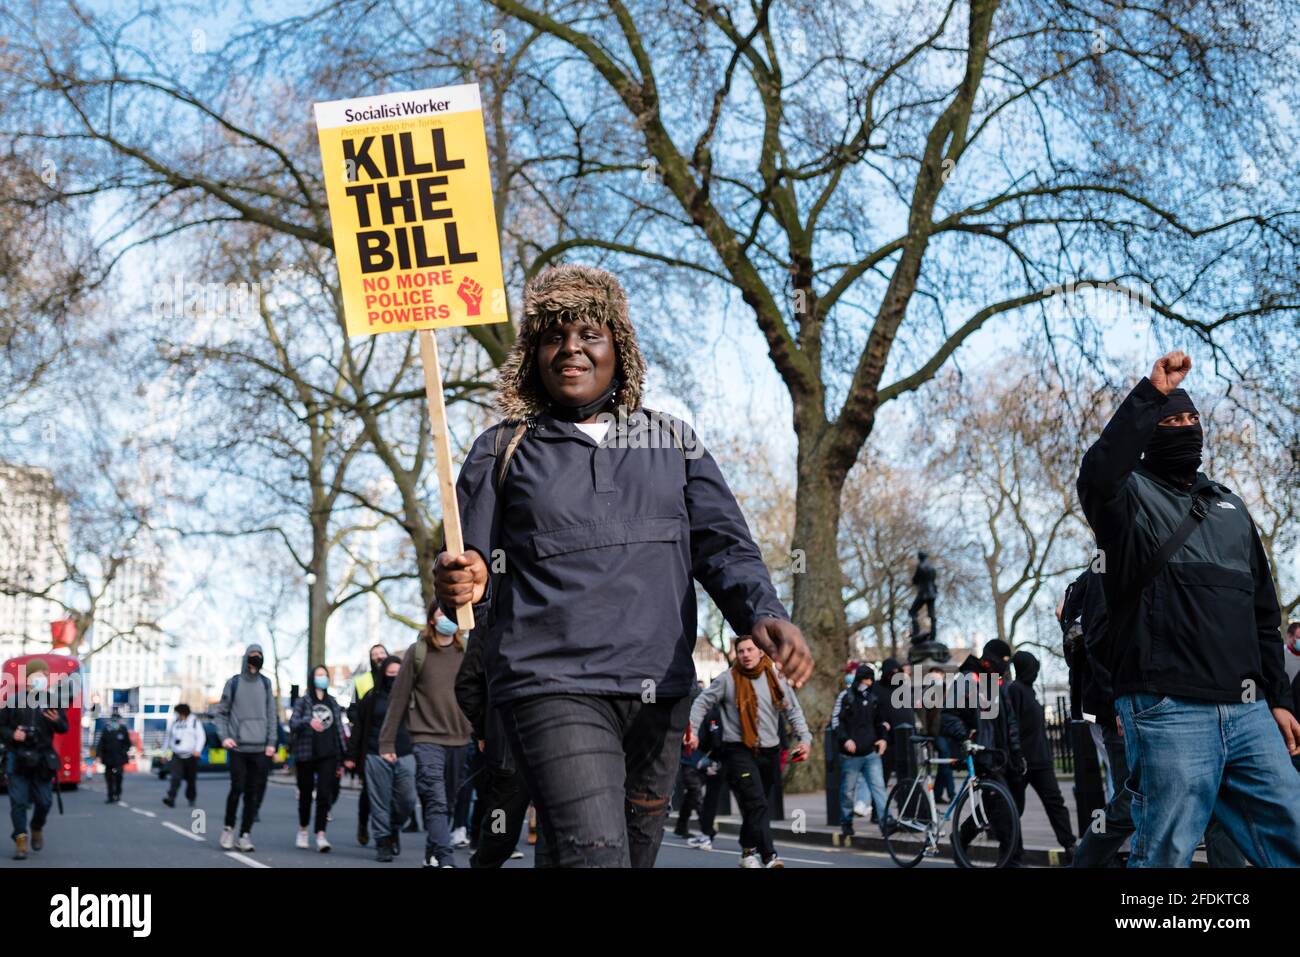 London, UK. 17 Apr 2021. 'Kill The Bill' protest, against the government's proposed Police, Crime, Sentencing and Courts Bill. Stock Photo